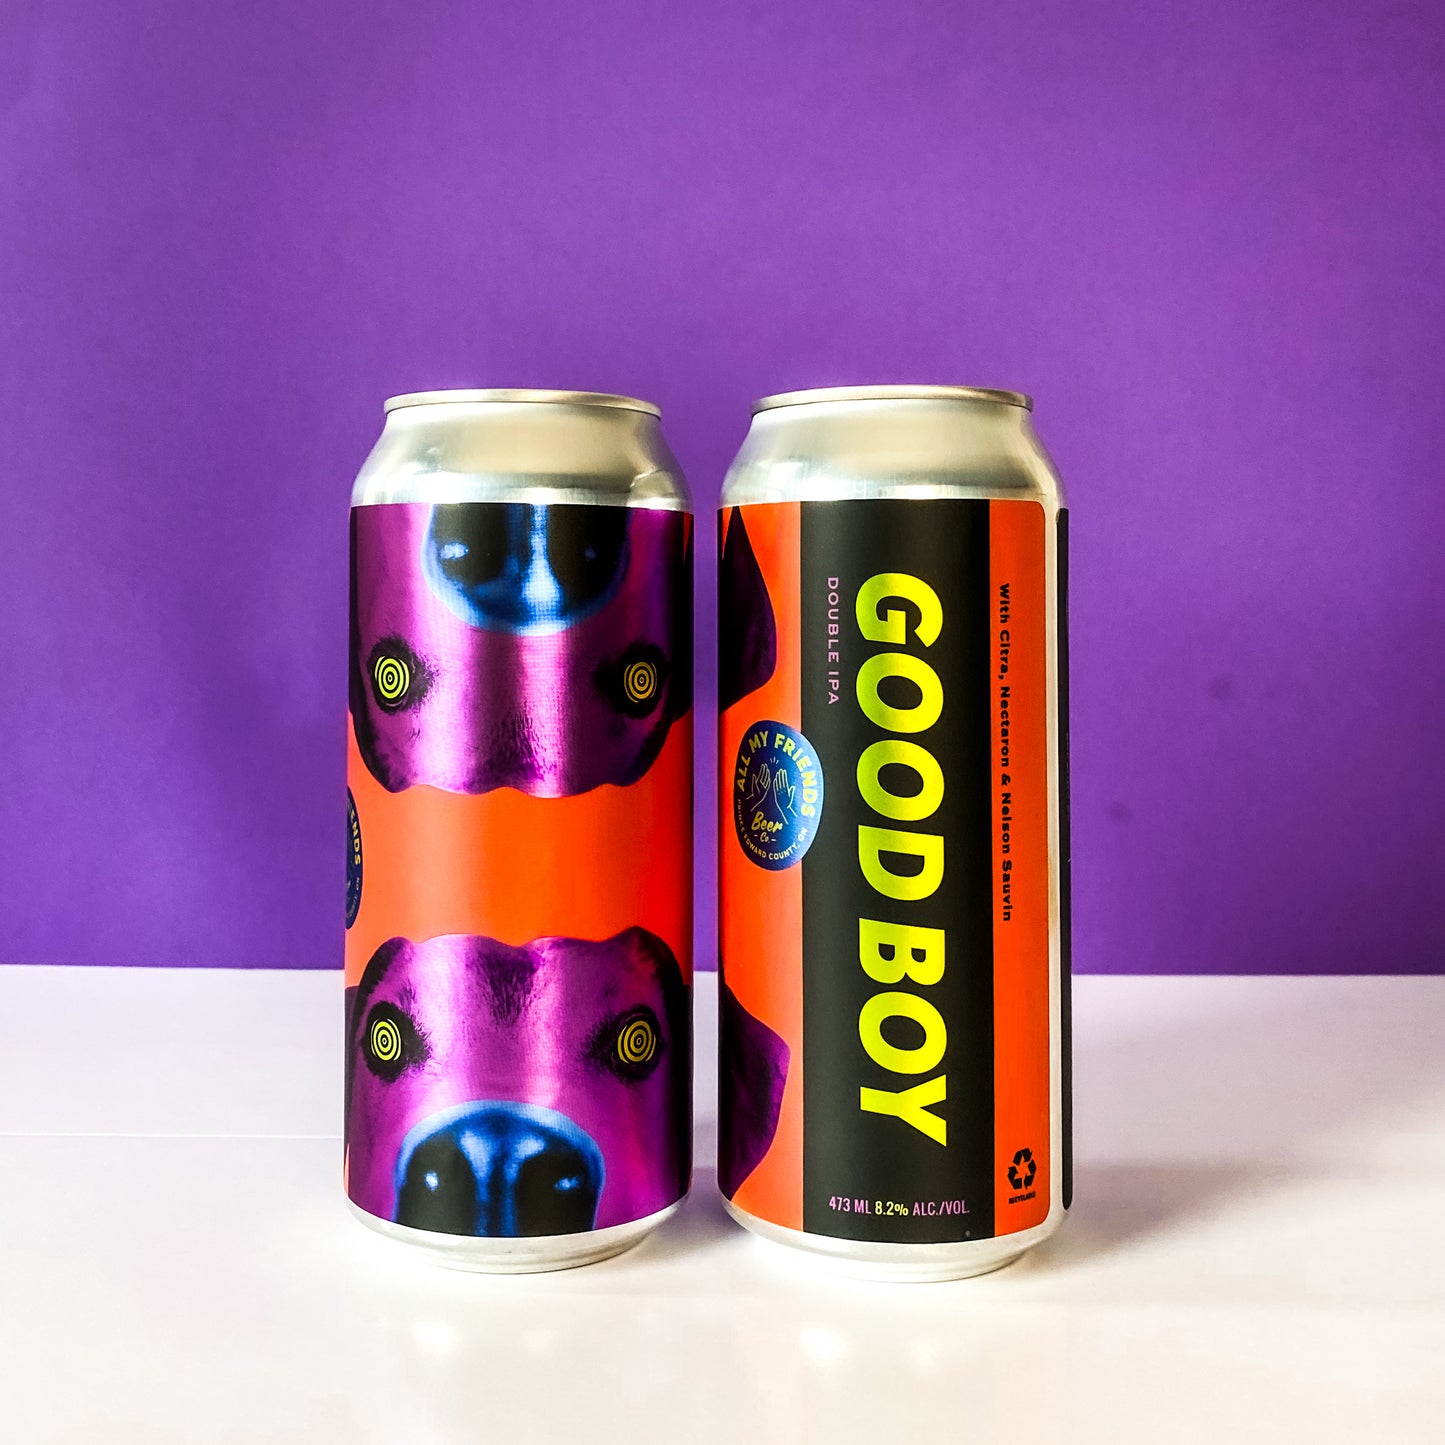 Good Boy - Hazy Double IPA 8.2% - 473ml Can - Collaboration w Wood Brothers Brewing Co